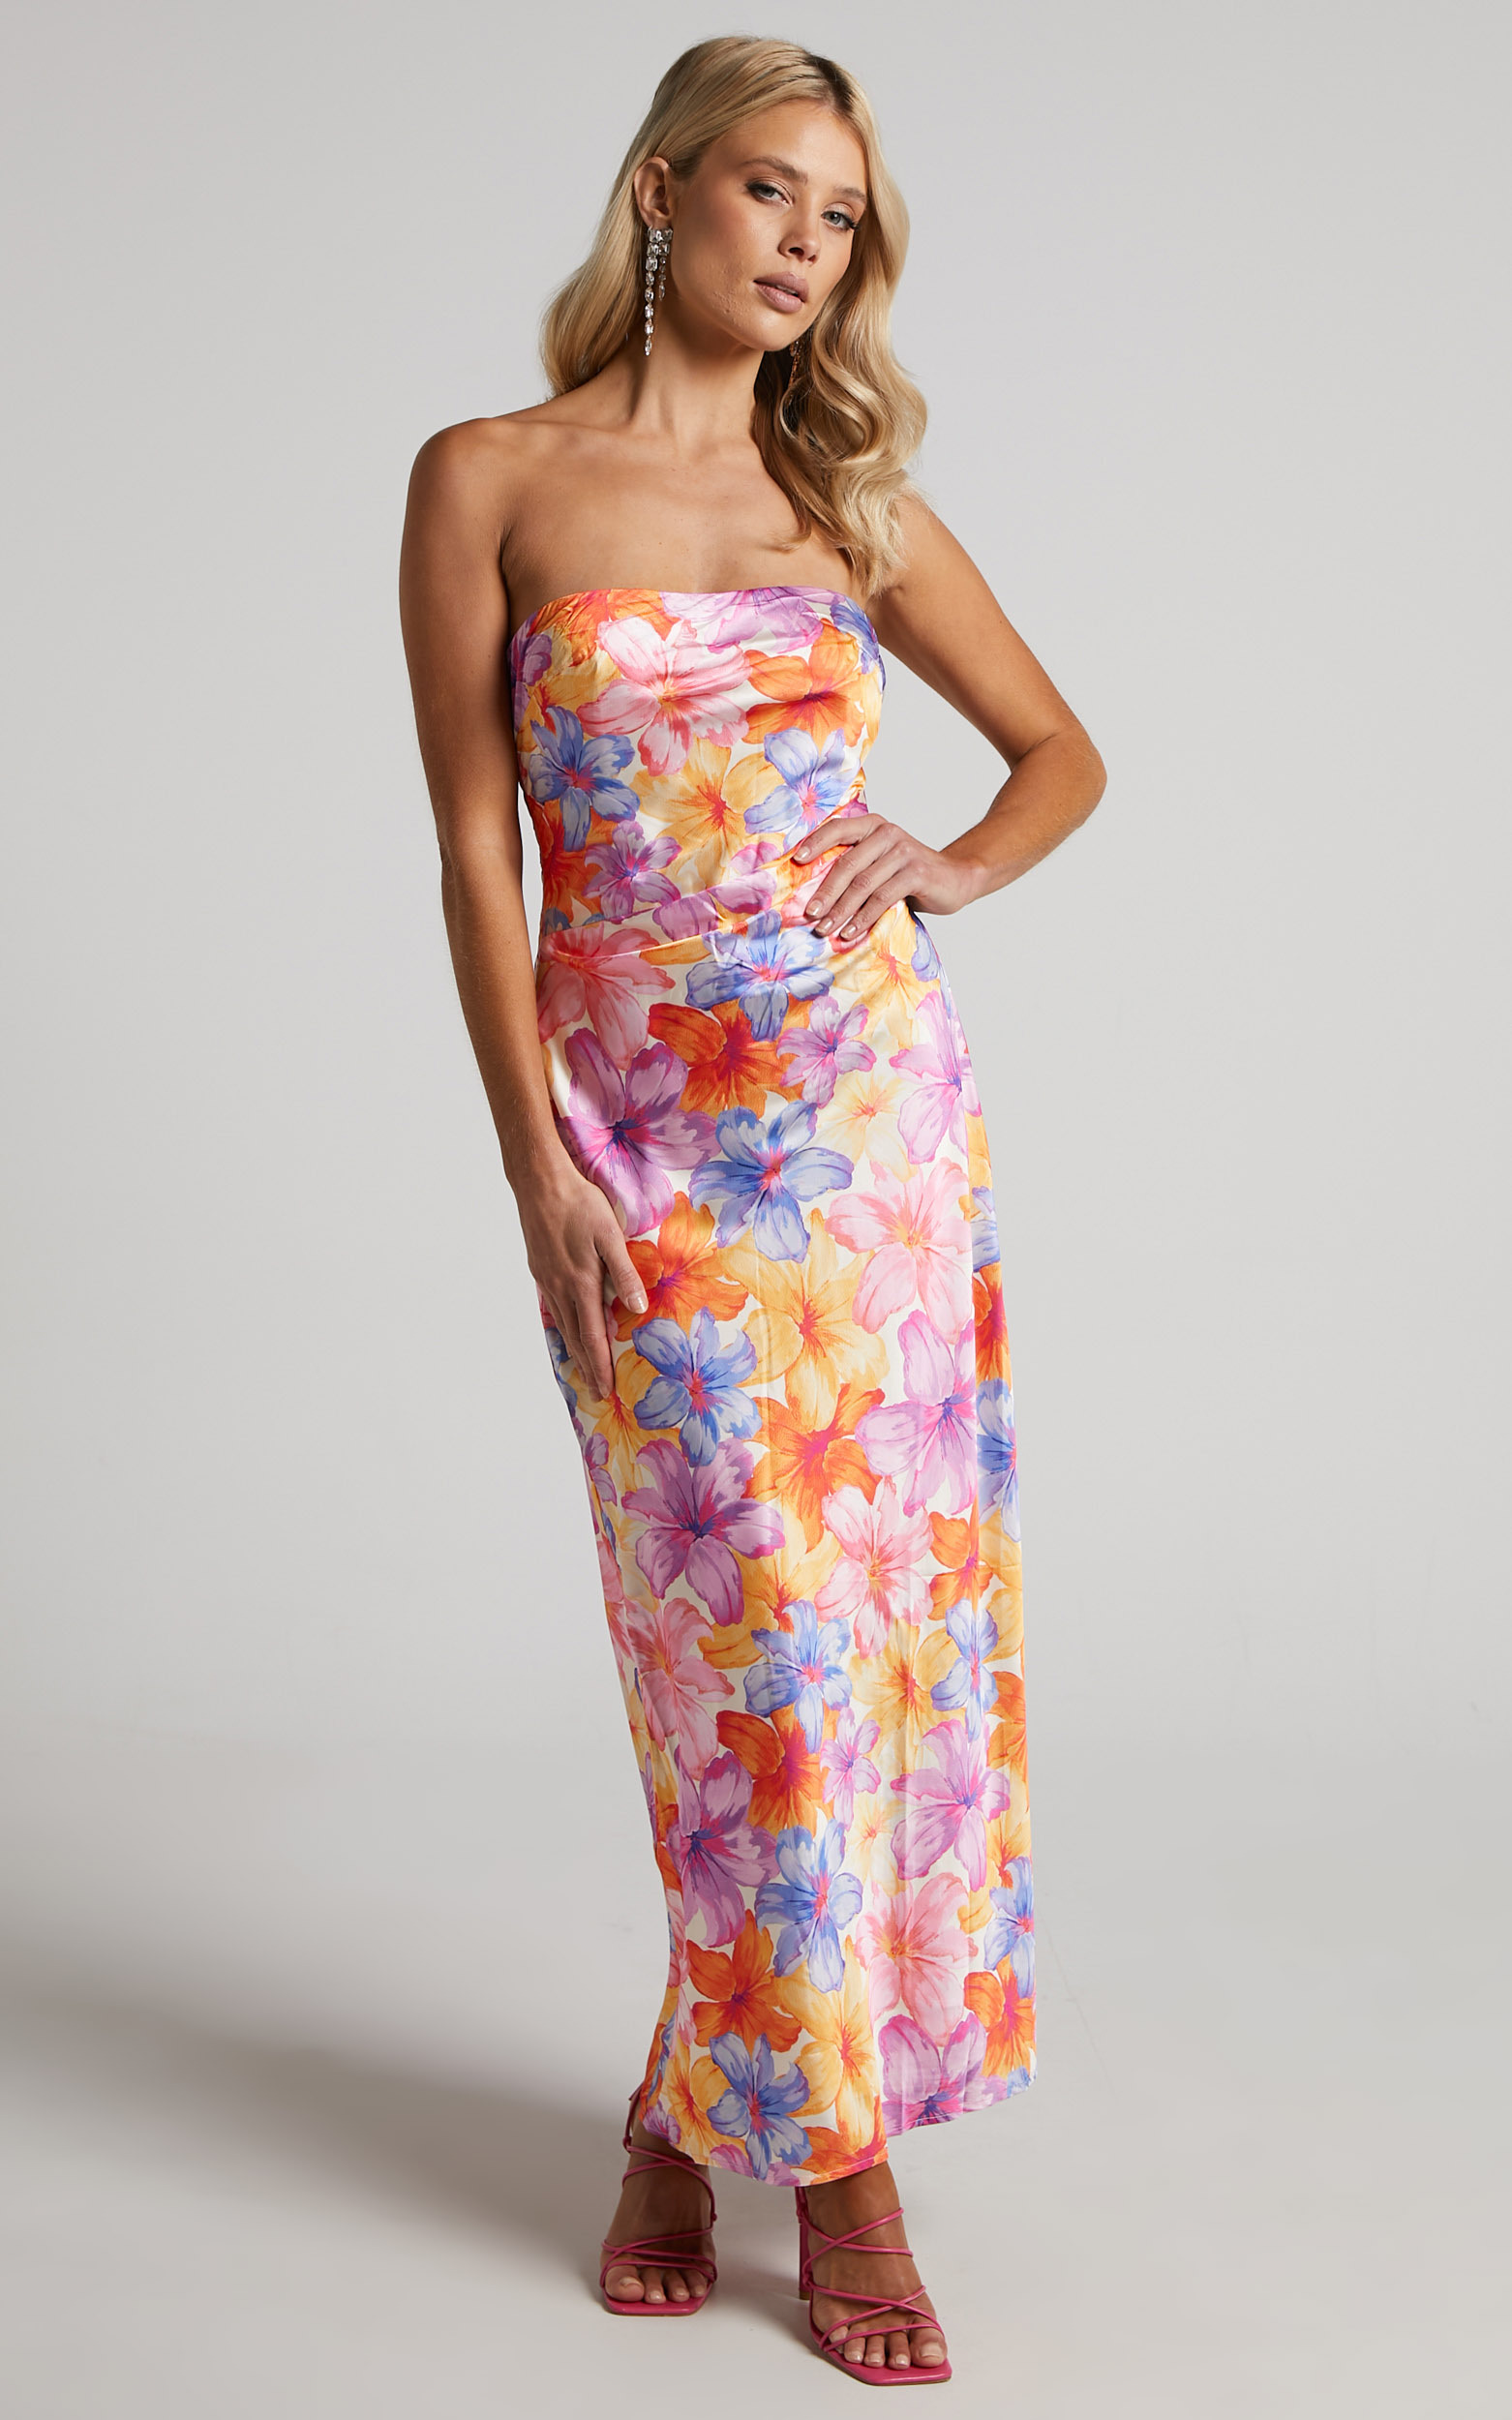 RUNAWAY THE LABEL - Splendour Strapless Dress in Multi Floral - XS, MLT1, hi-res image number null